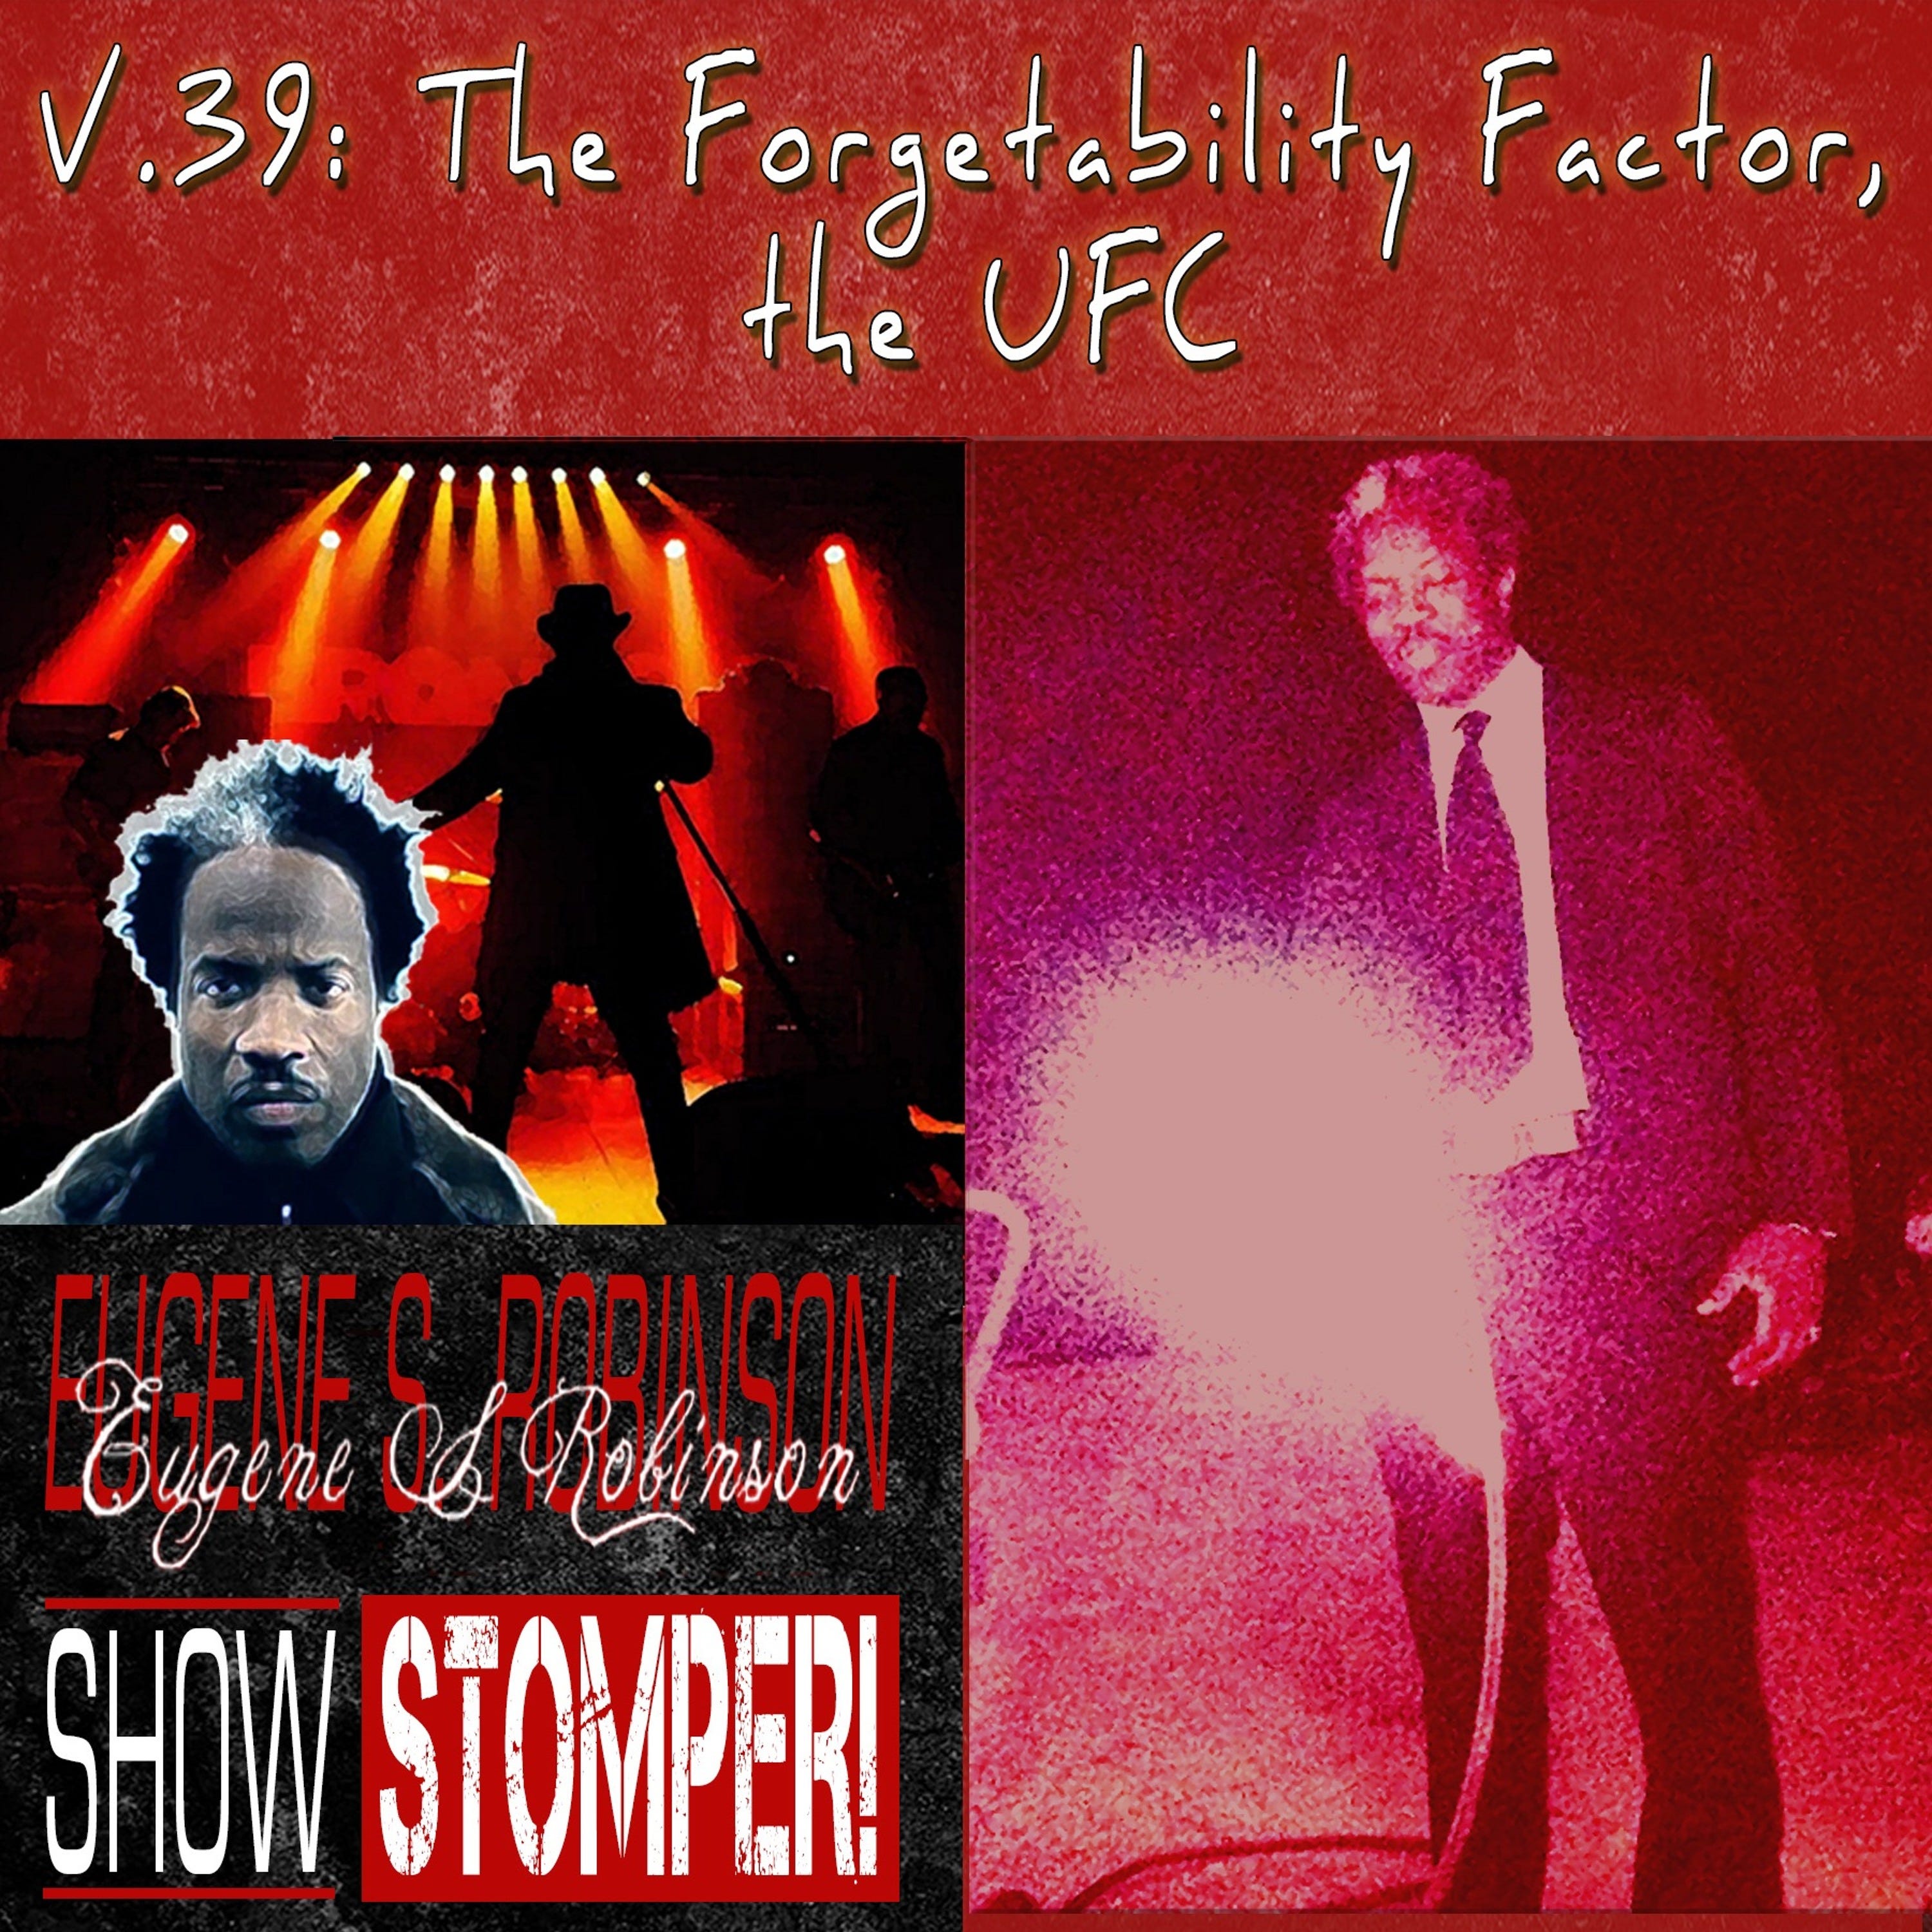 The Eugene S. Robinson Show Stomper! V.39 - The Forgettability Factor, The UFC